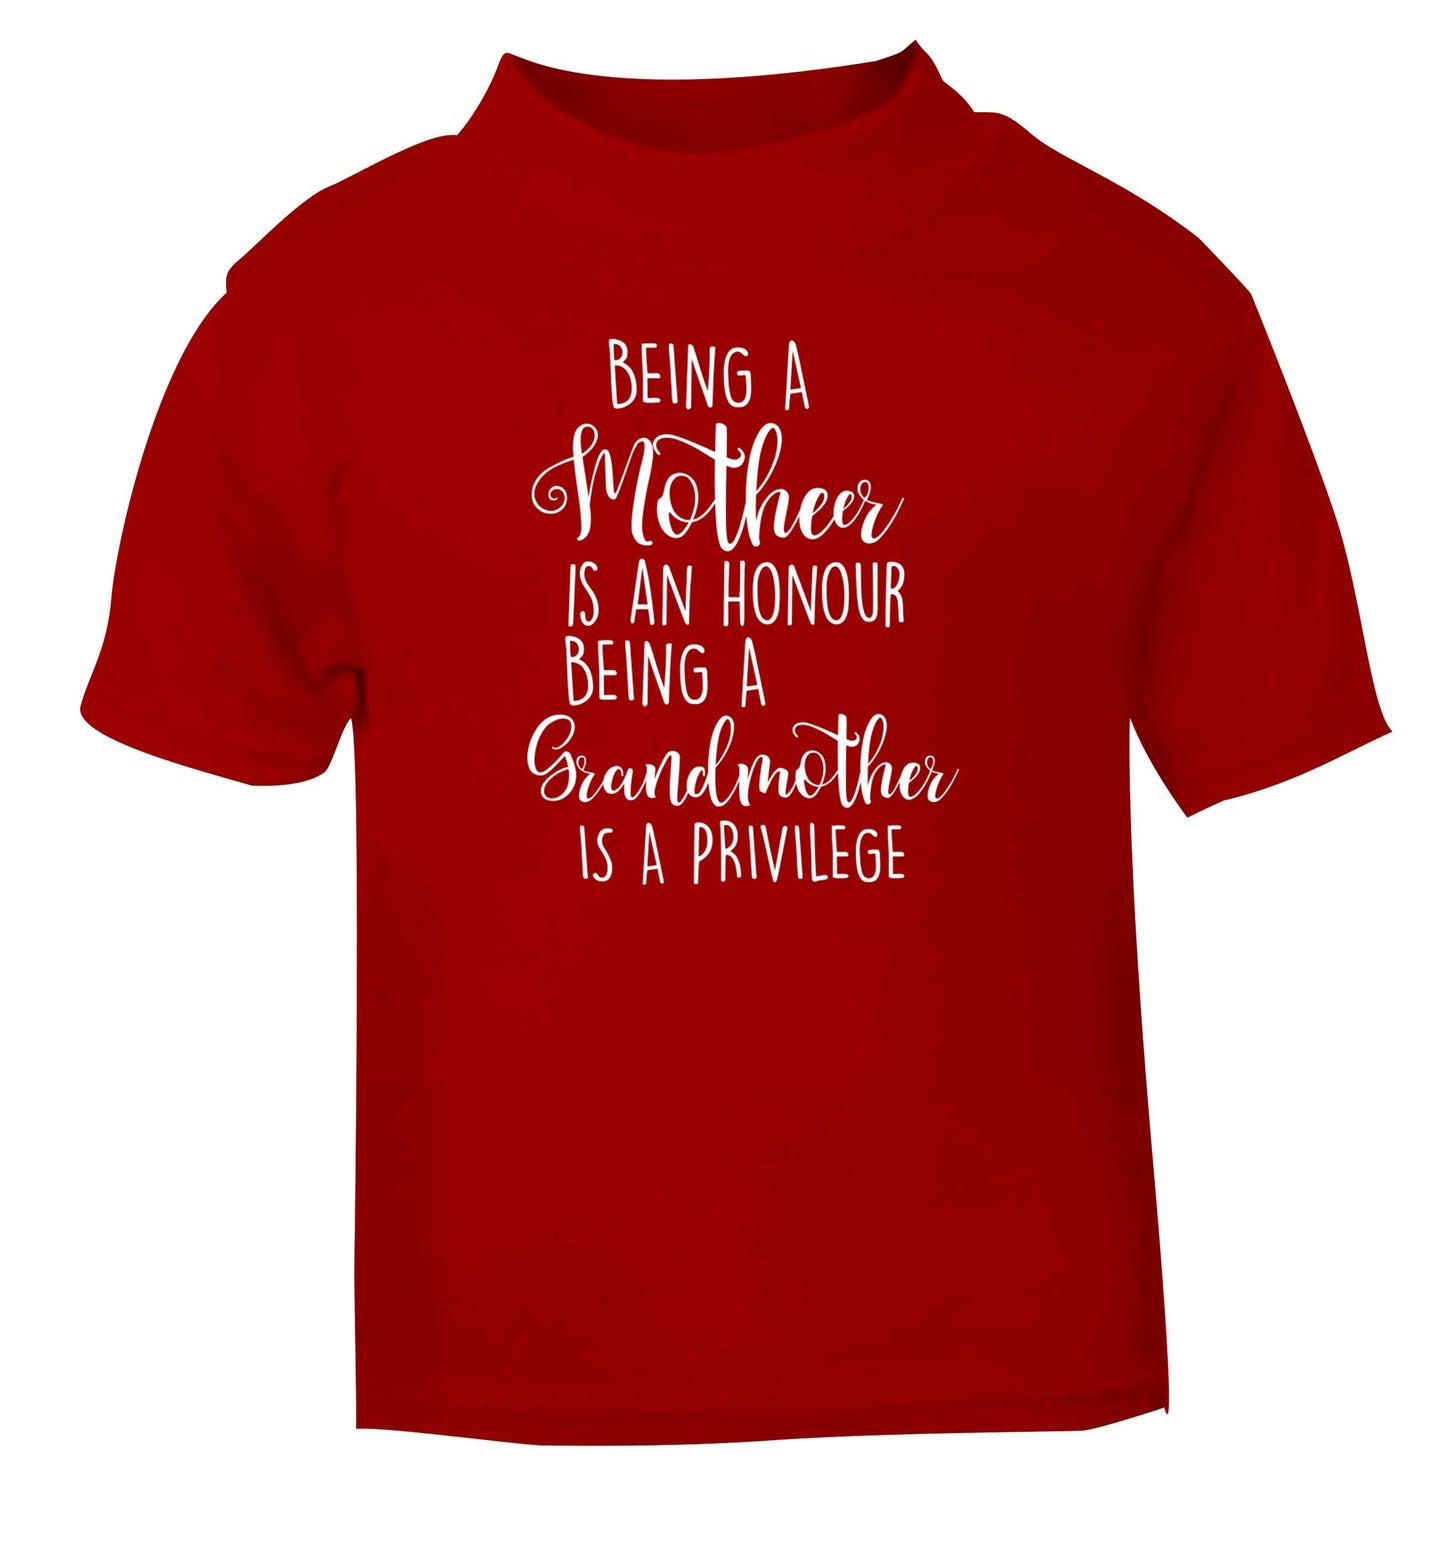 Being a mother is an honour being an grandmother is a privilege red Baby Toddler Tshirt 2 Years